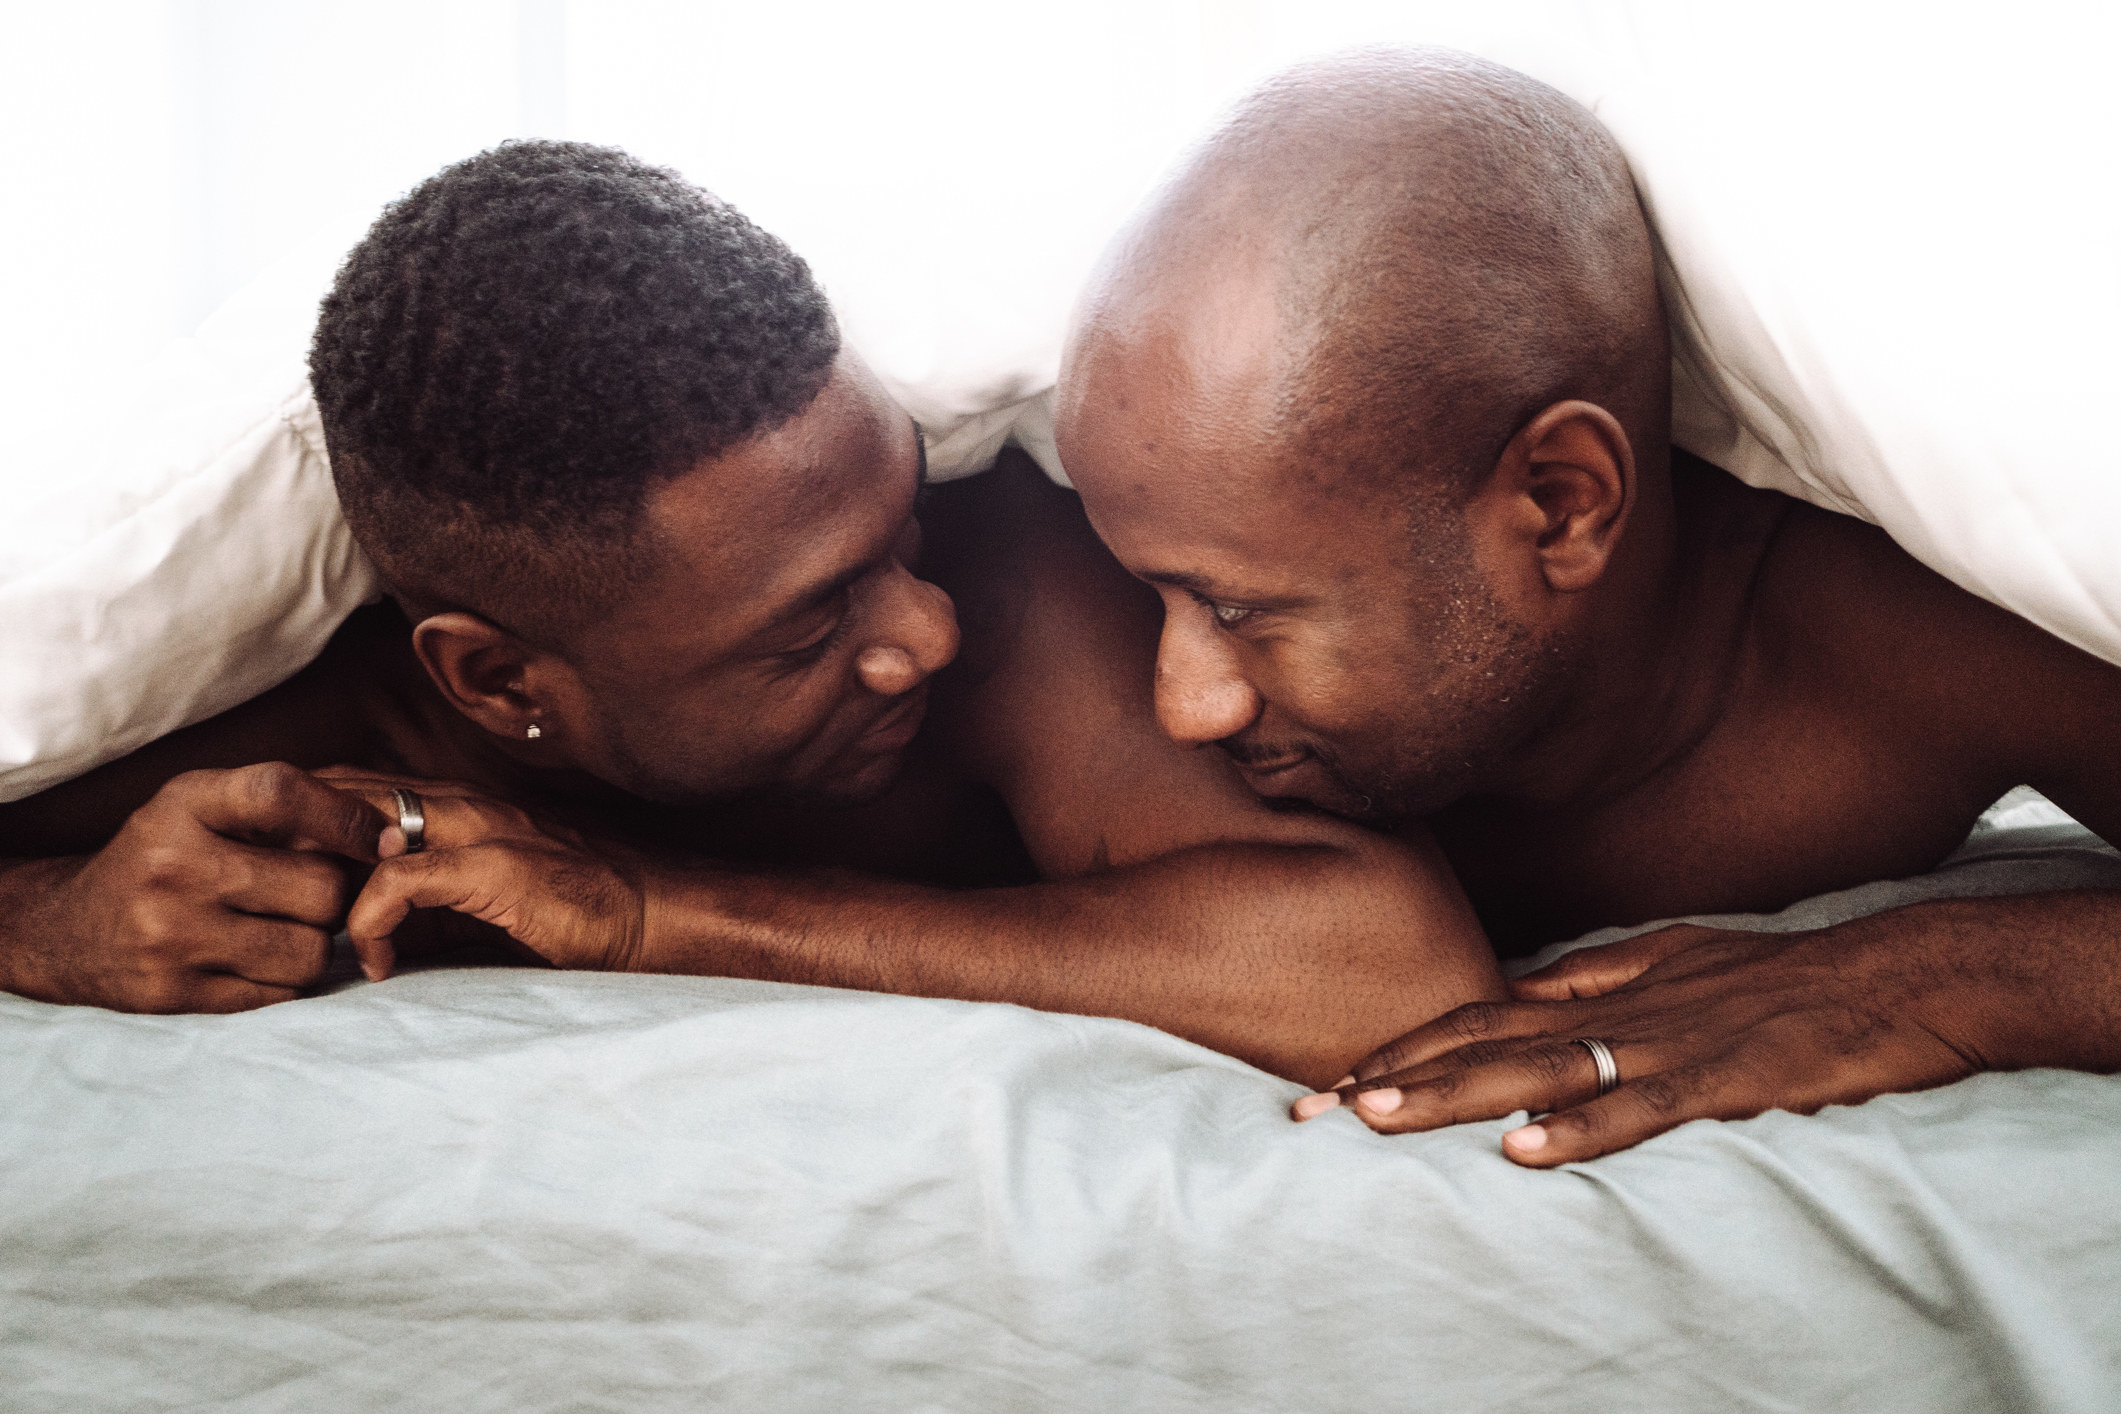 A same-sex couple in bed together